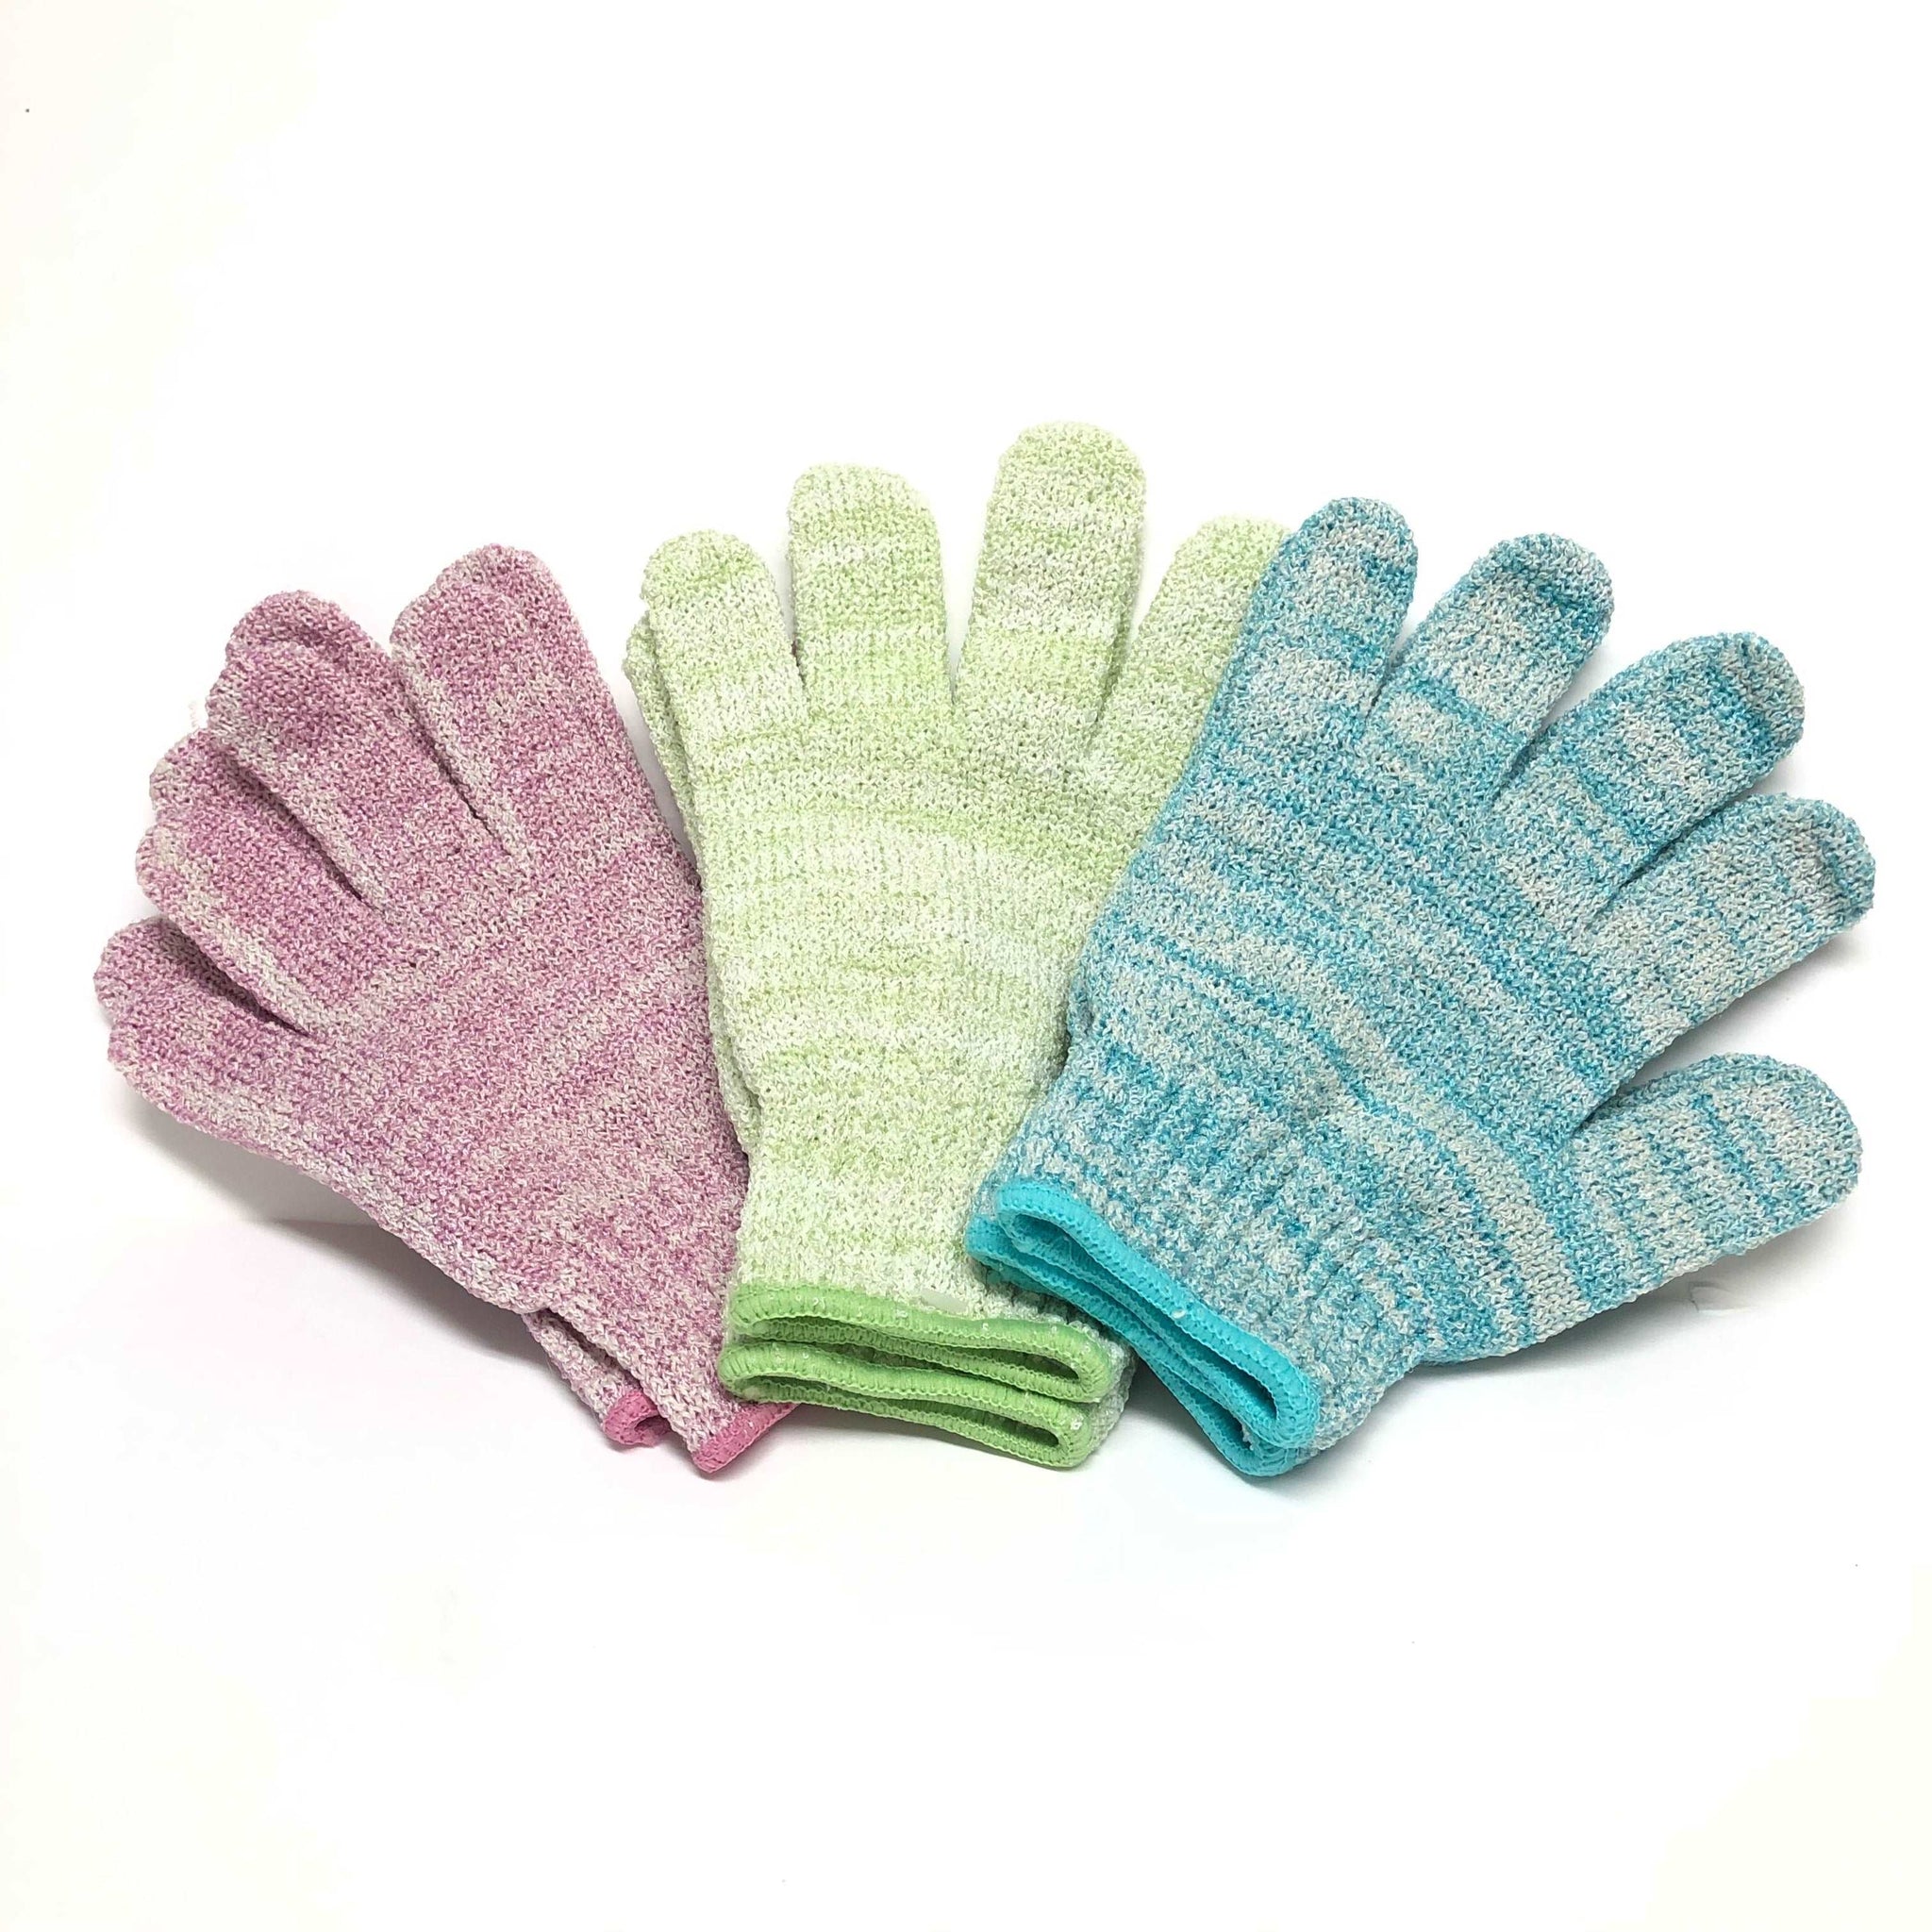 Our high quality shower gloves have a gentle, soft texture for exfoliating and can be used for both facial and body applications in the bath or shower. Sold in pairs.